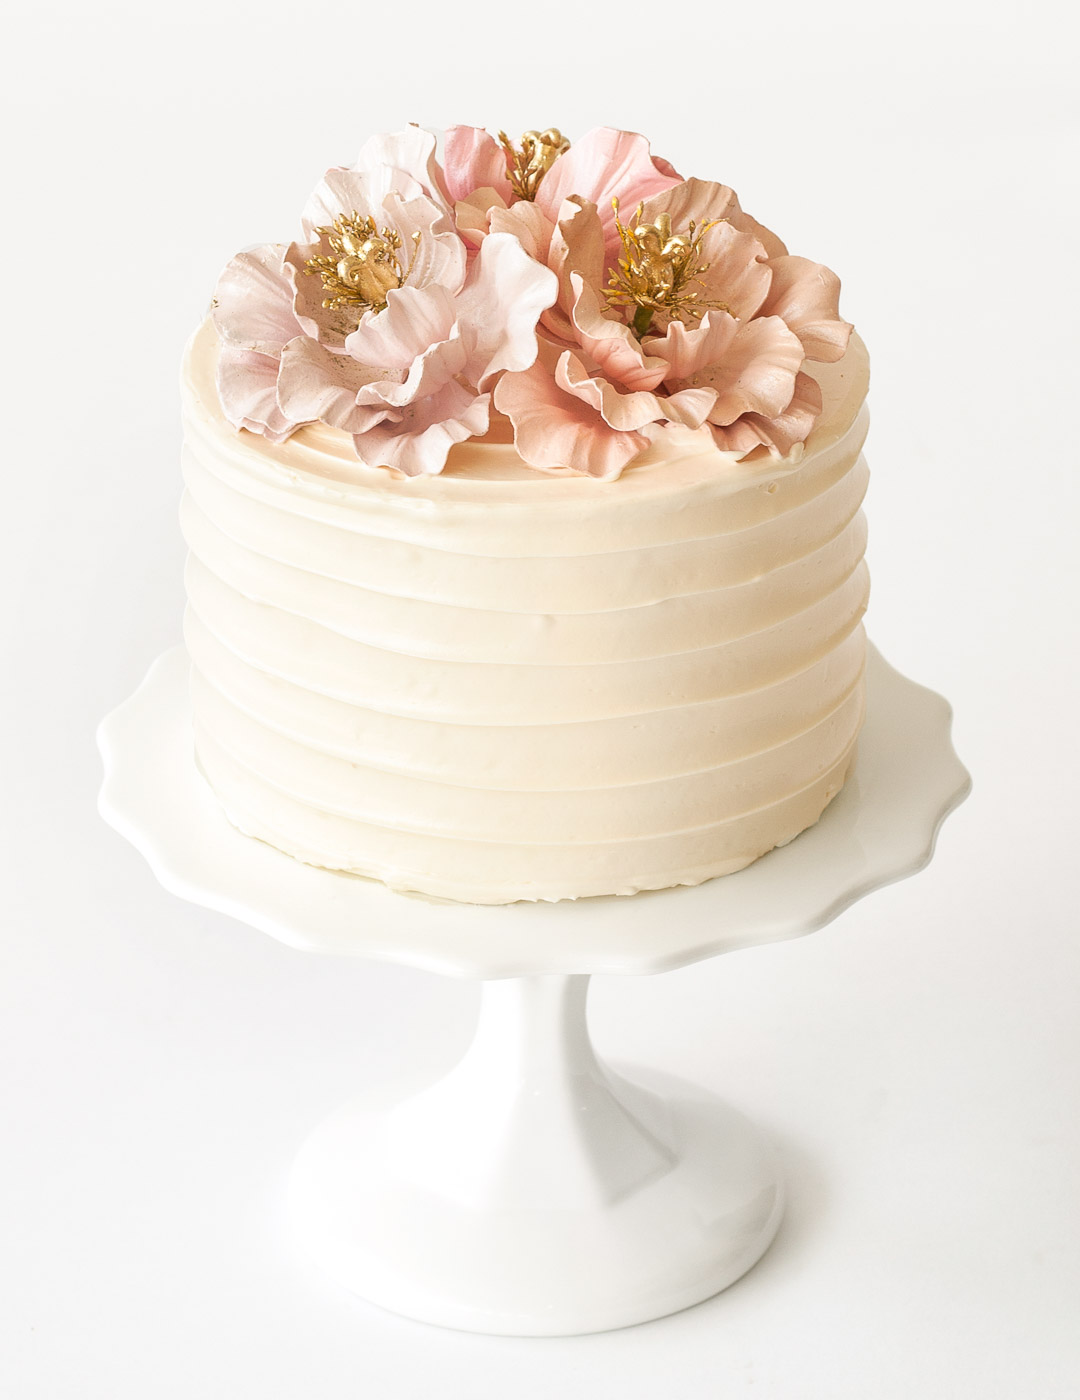 Floral Cakes - Quality Cake Company Tamworth